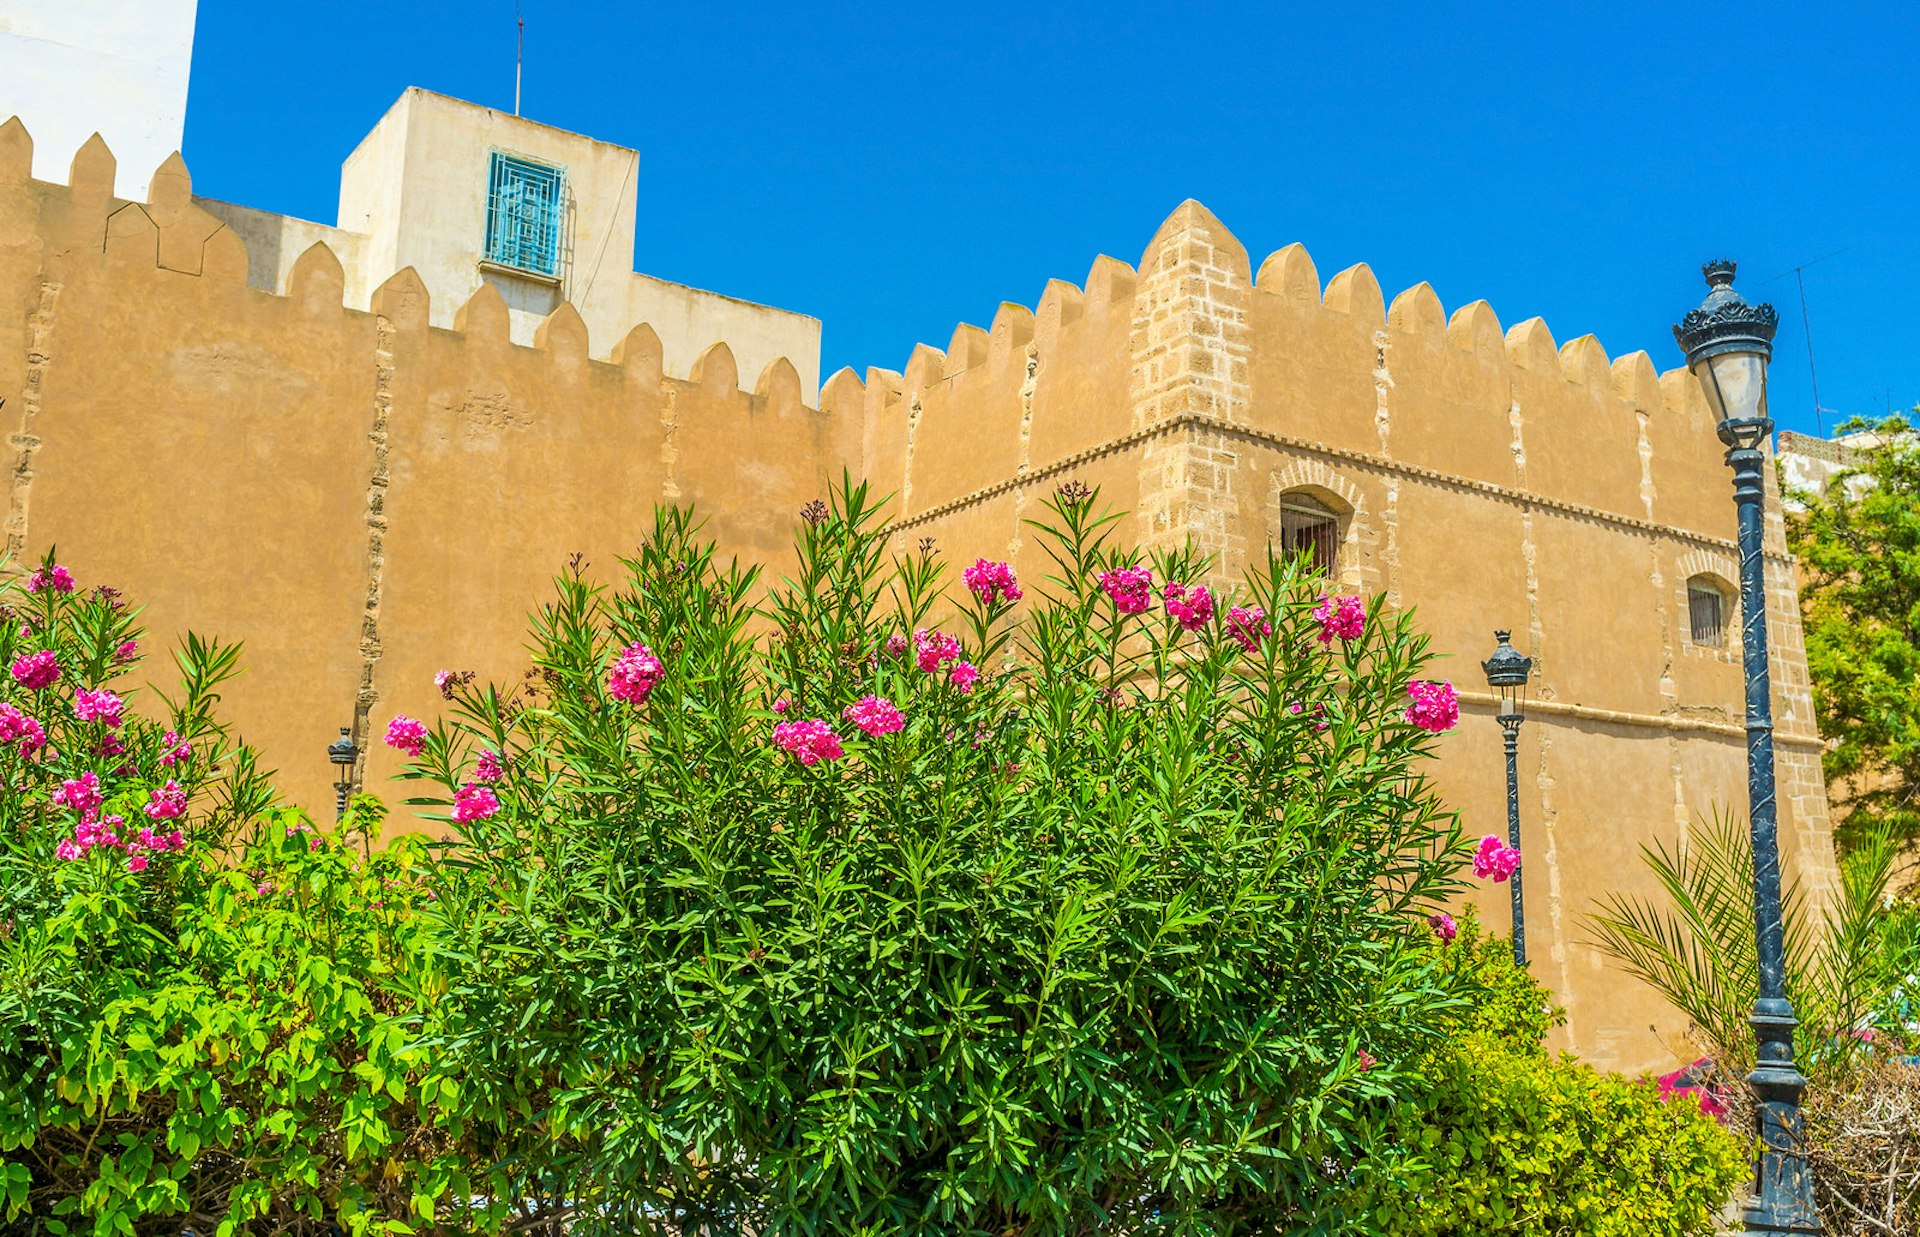 The medieval fortification of Sfax surrounded by lush gardens with many colourful flowers, Tunisia.